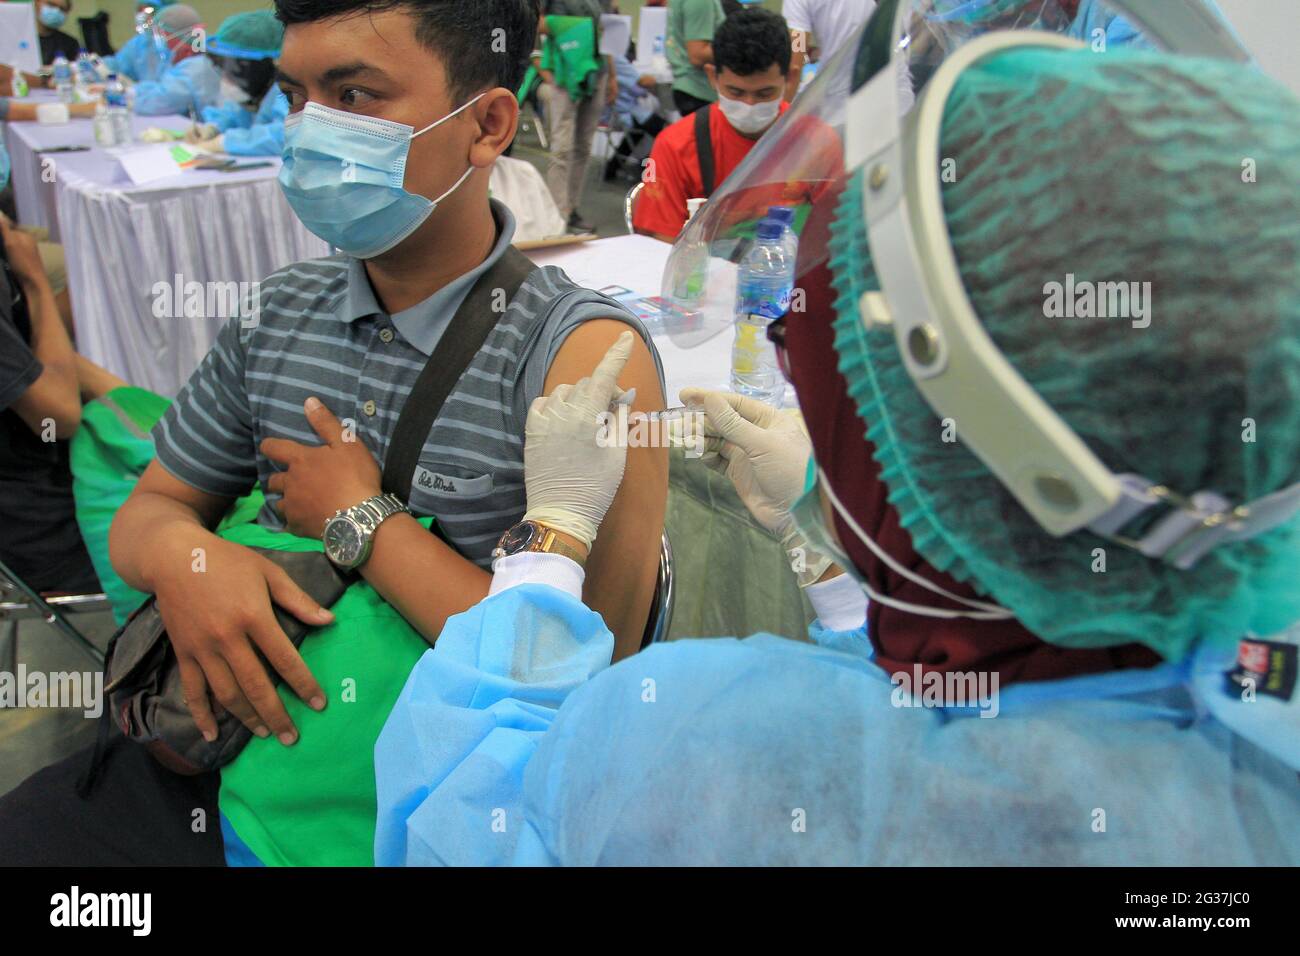 Jakarta, Indonesia. 14th June, 2021. A man receives a dose of COVID-19 vaccine during a mass vaccination in Yogyakarta, Indonesia, June 14, 2021. Due to the surging increase of COVID-19 cases since the past several days in the country, Indonesia resorted to boosting the vaccination program against the lingering coronavirus disease. Credit: Joni/Xinhua/Alamy Live News Stock Photo